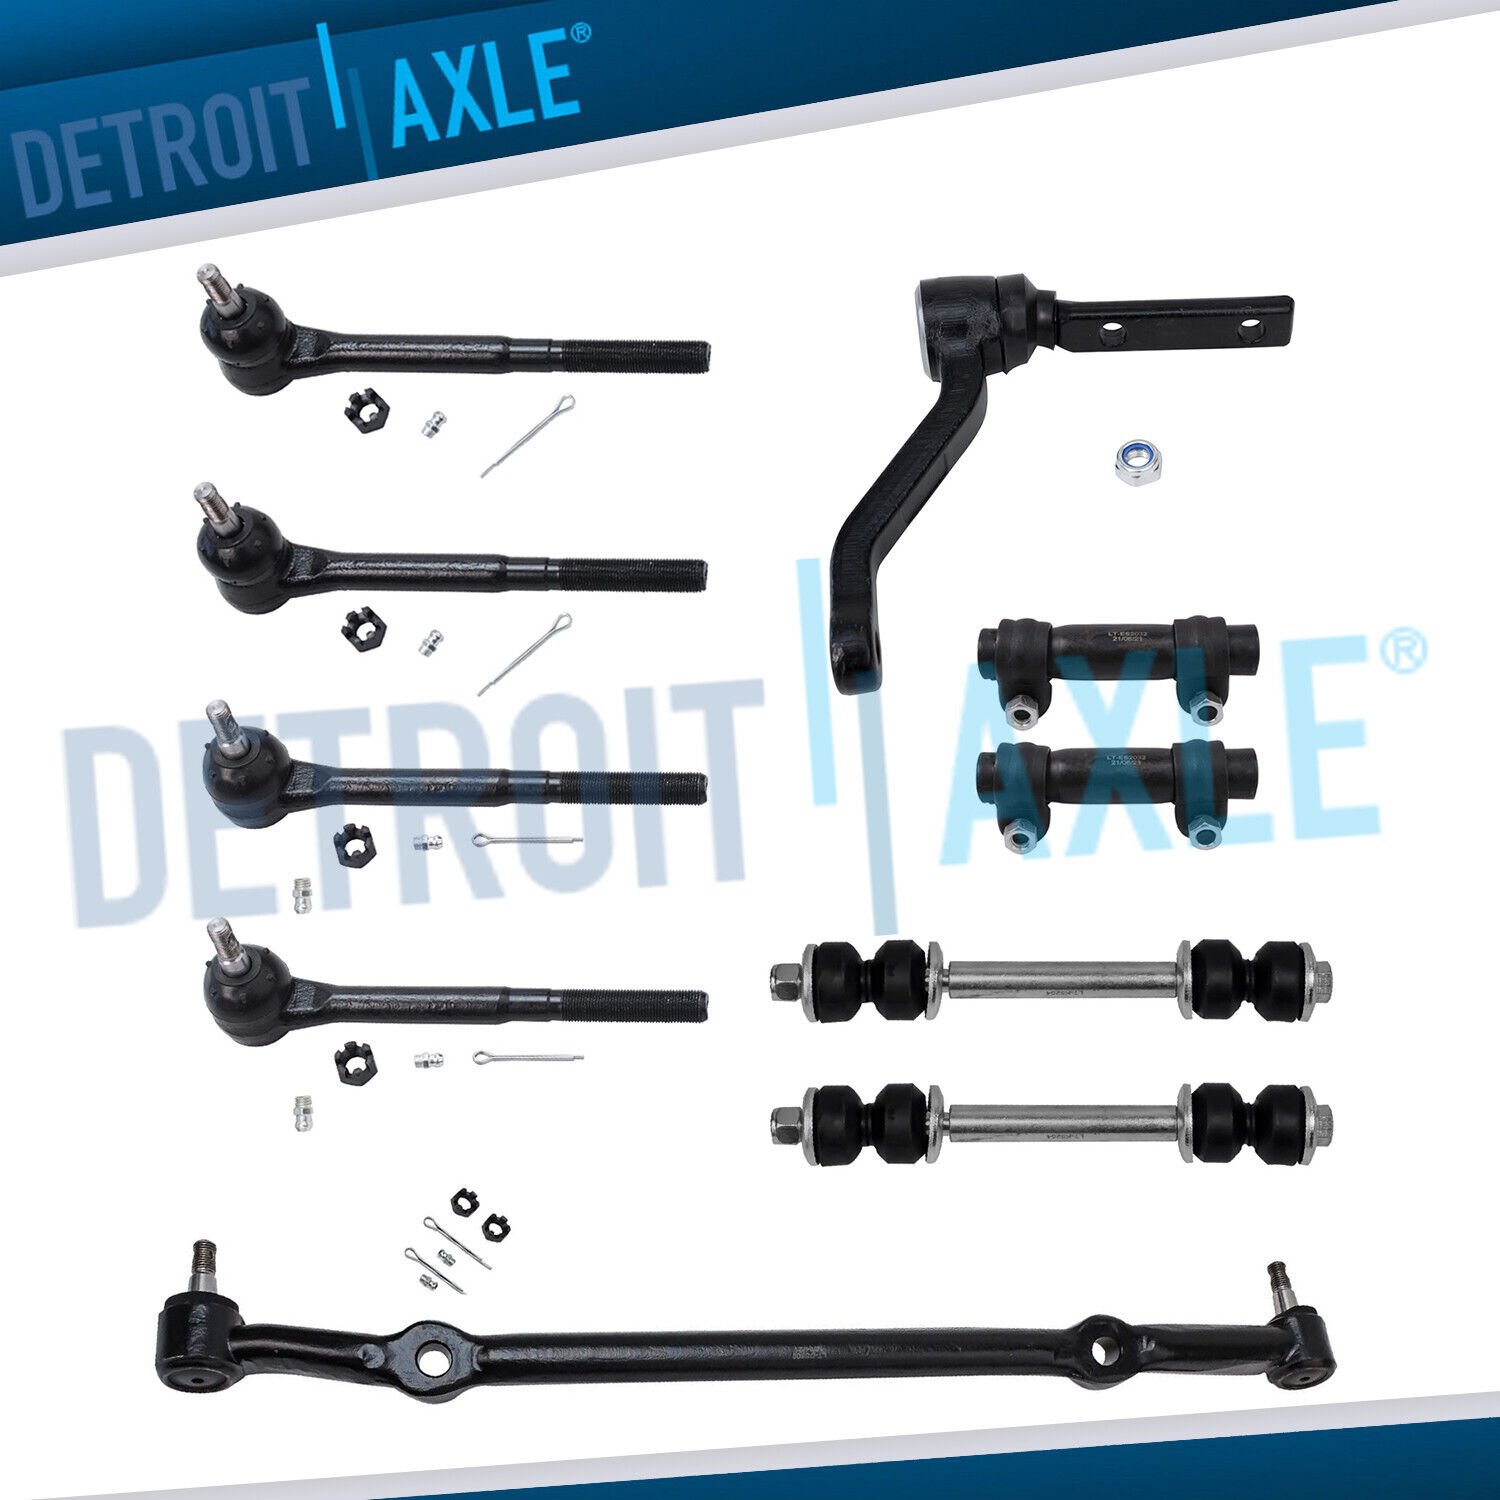 New 10pc Complete Front Suspension Kit for Buick Century Regal 1978-1987